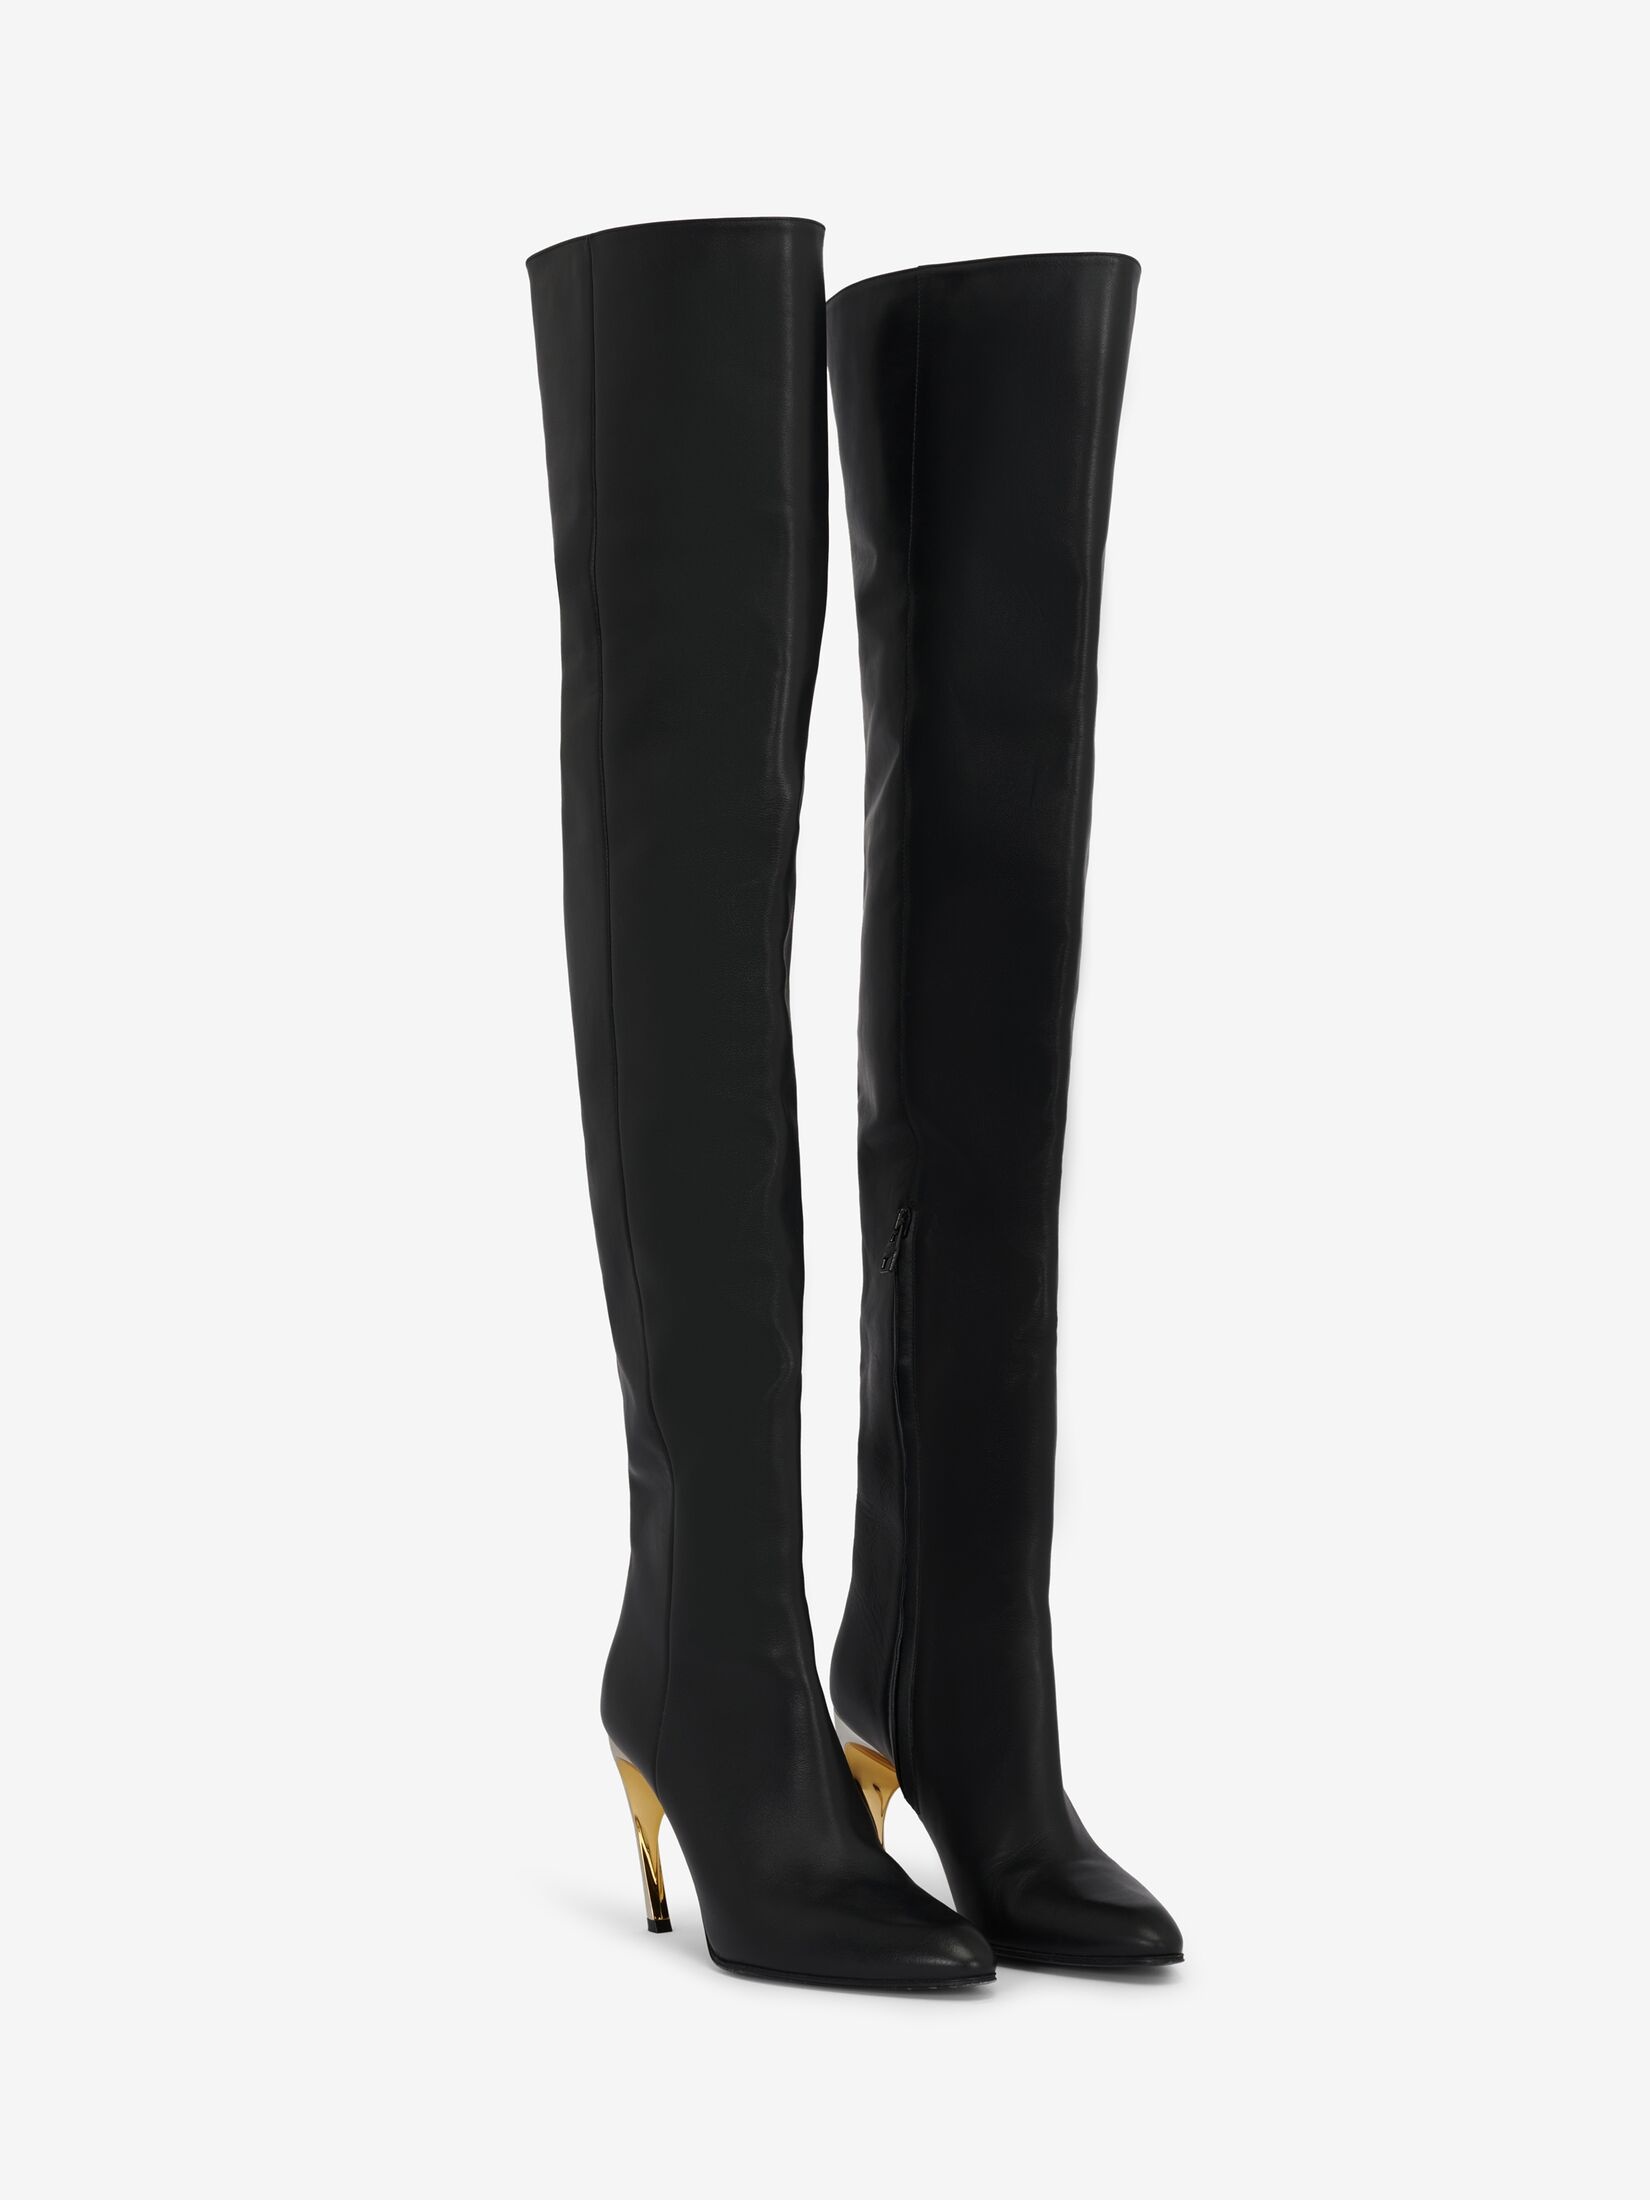 Women's Armadillo Thigh-high Boot in Black/silver/gold - 4